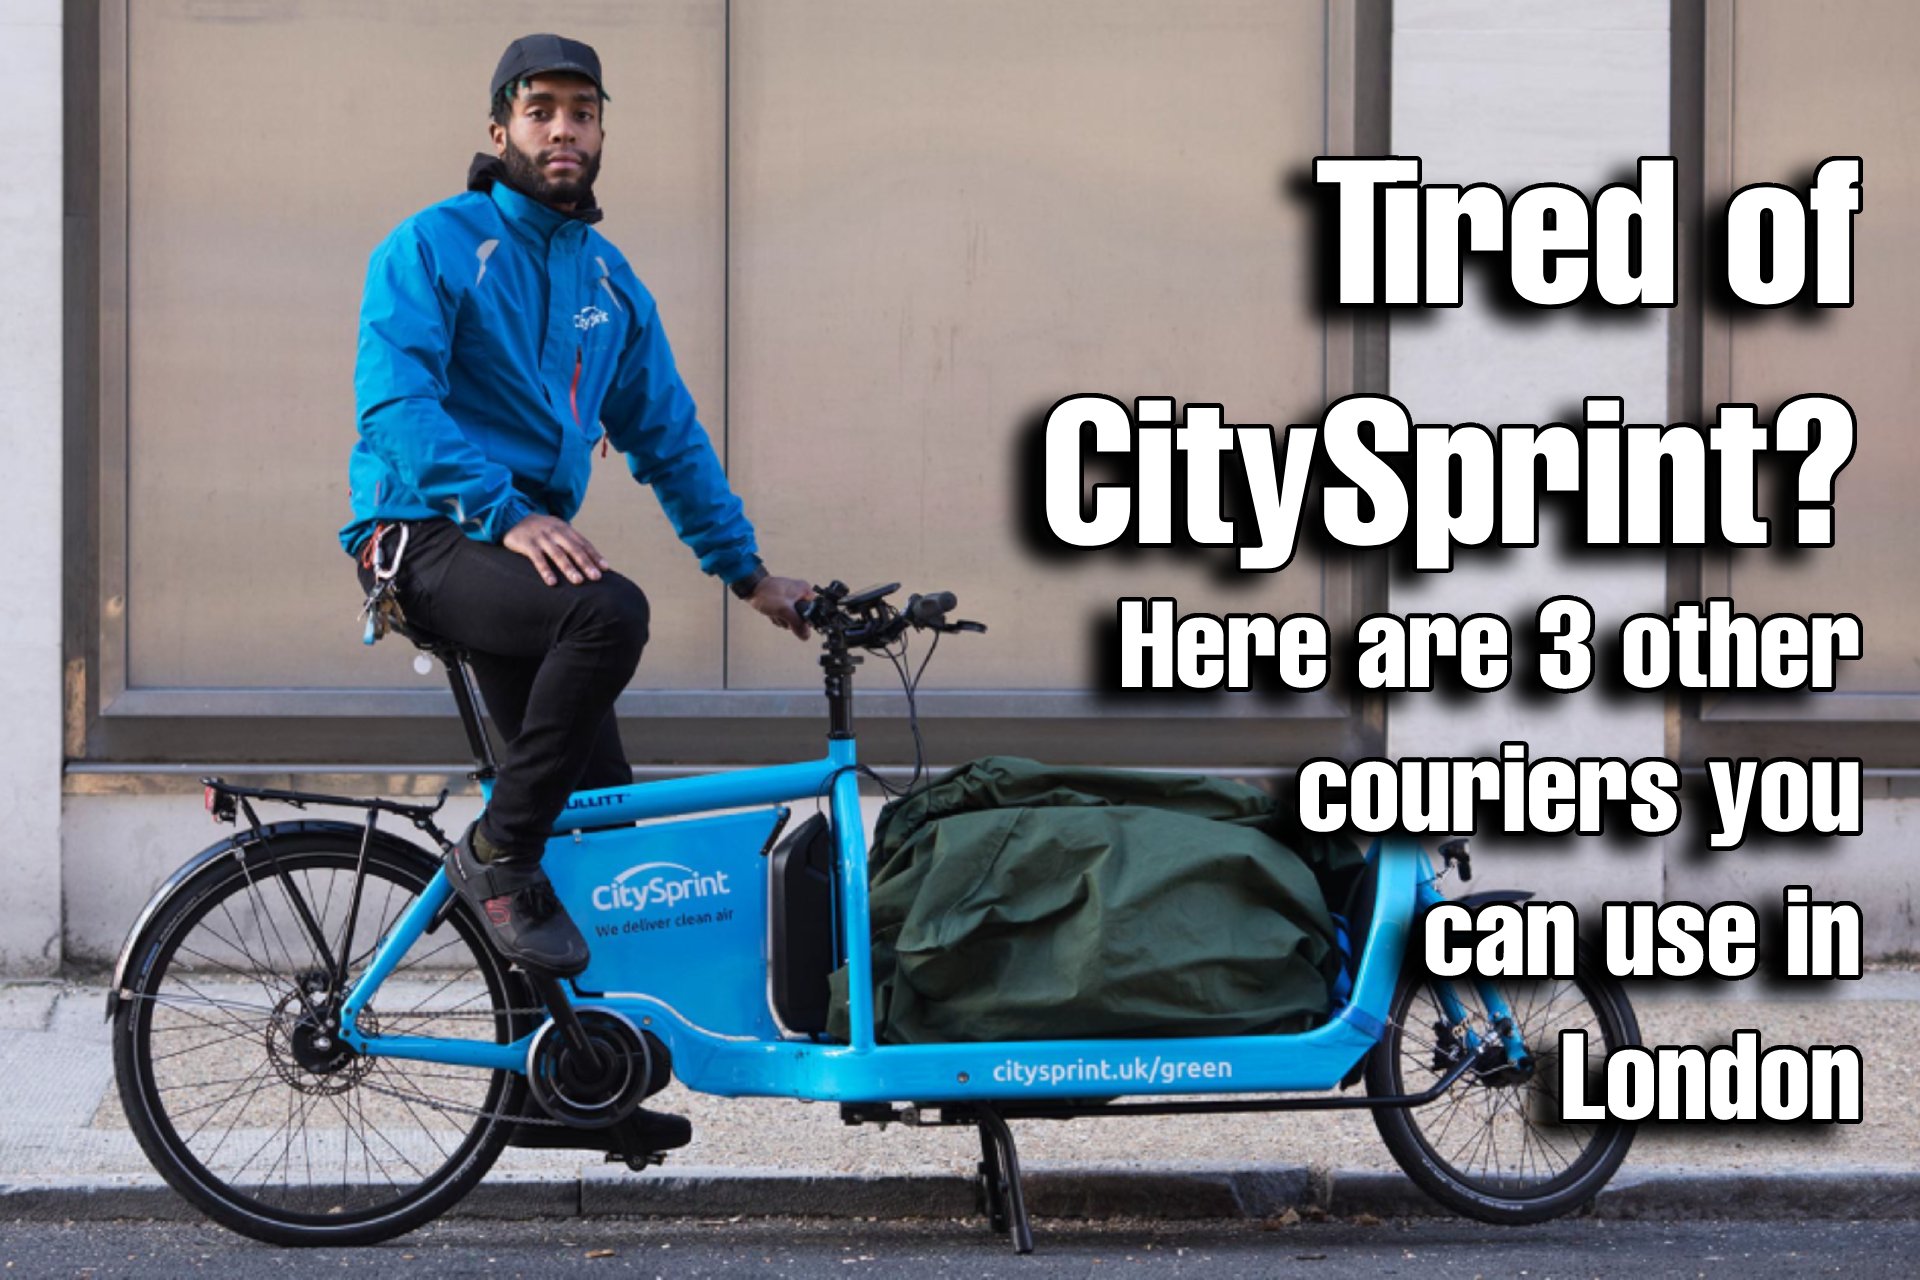 Tired of CitySprint? Here are 3 other couriers you can use in London